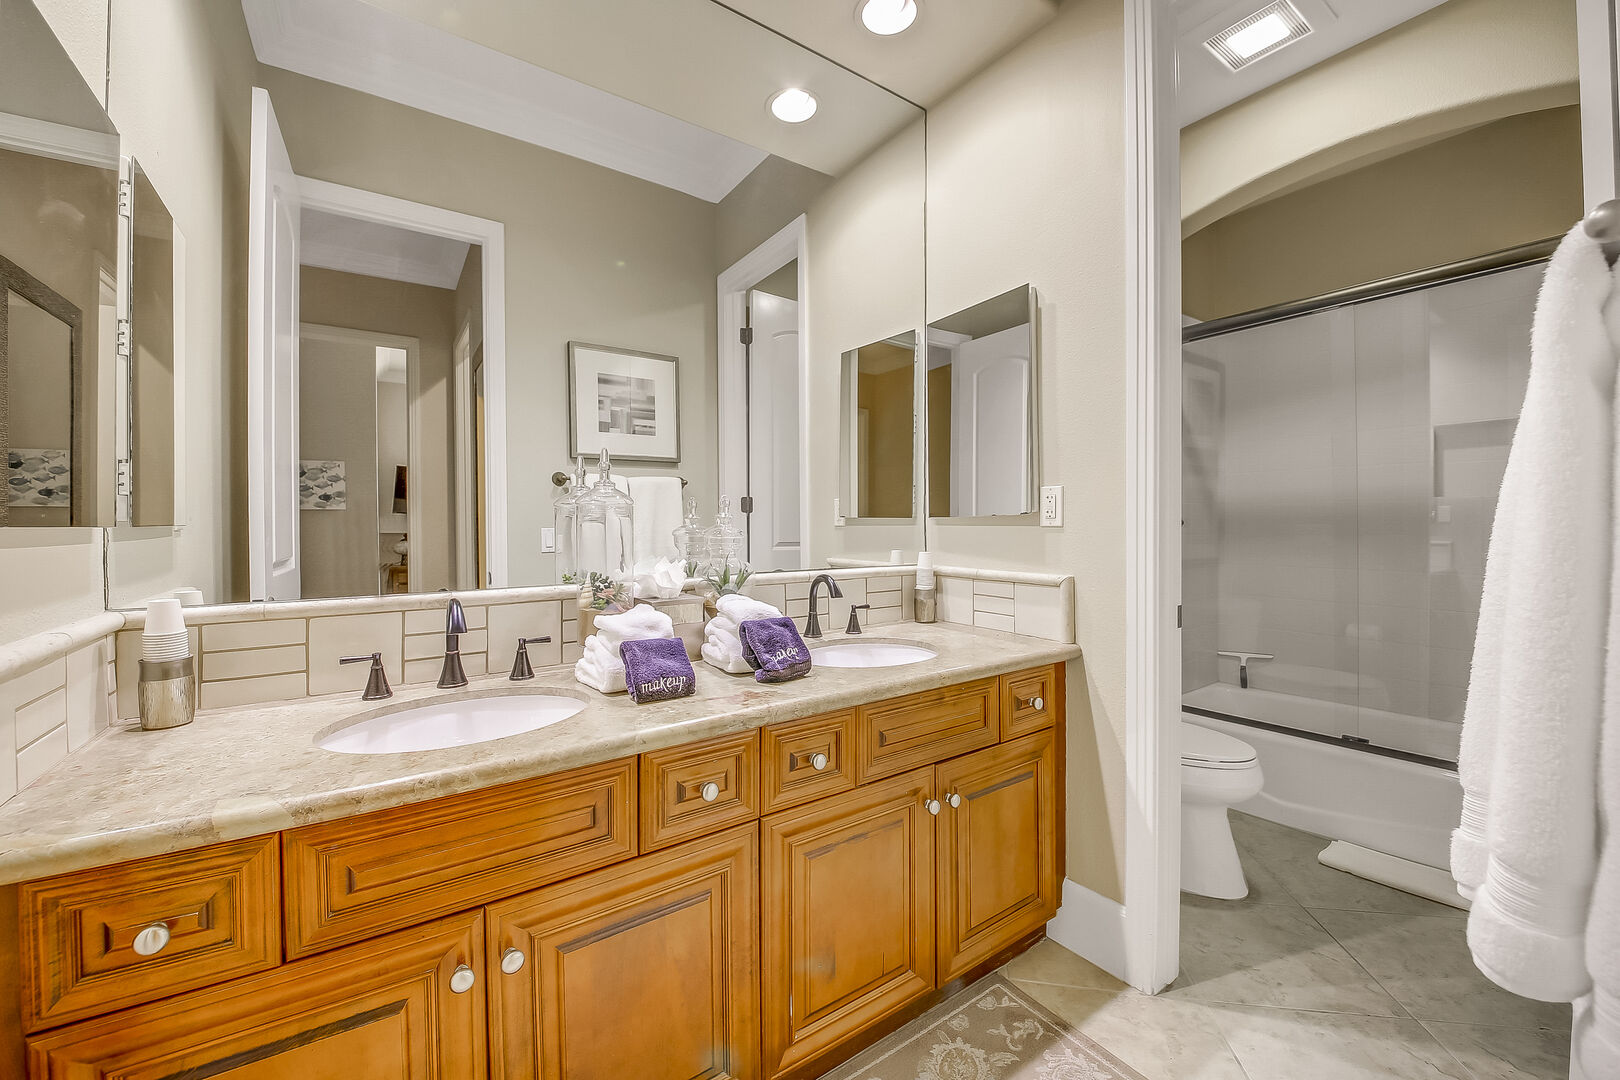 The hallway bathroom is next to the laundry room and features features a shower bathtub combo and double vanity sinks.